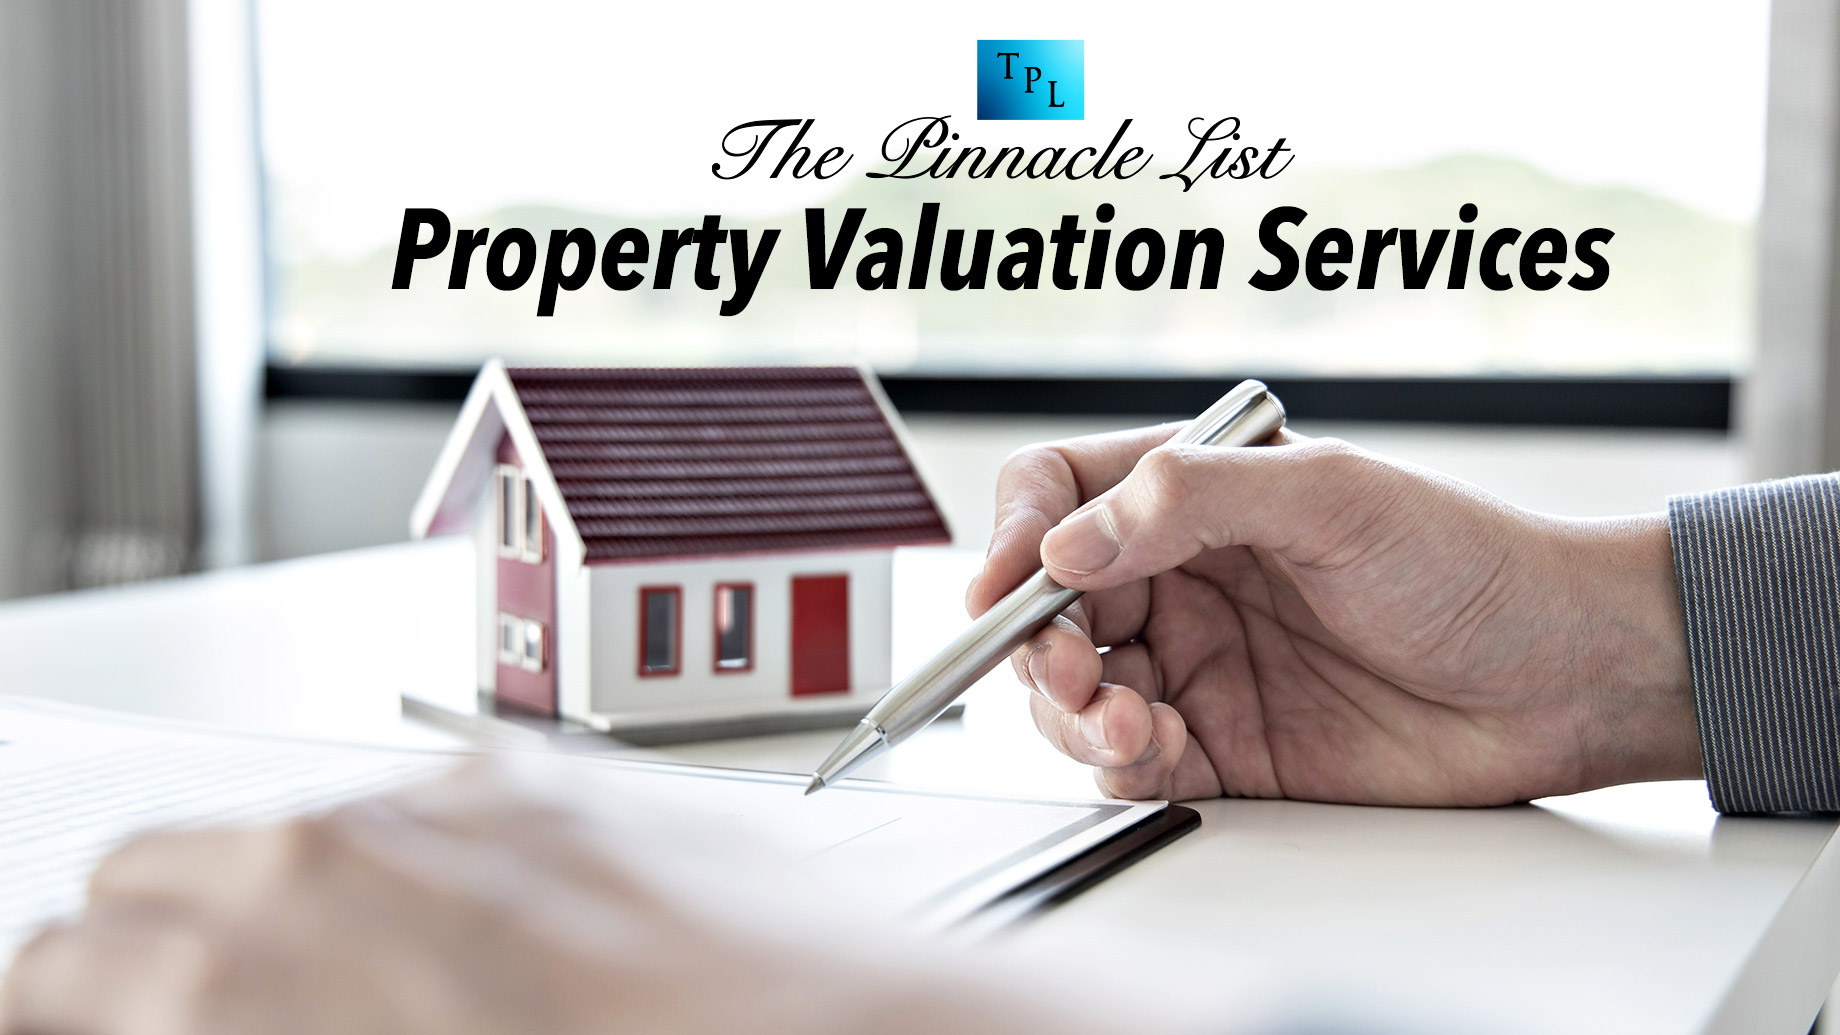 The Key Factors in Property Valuation: An Expert's Perspective